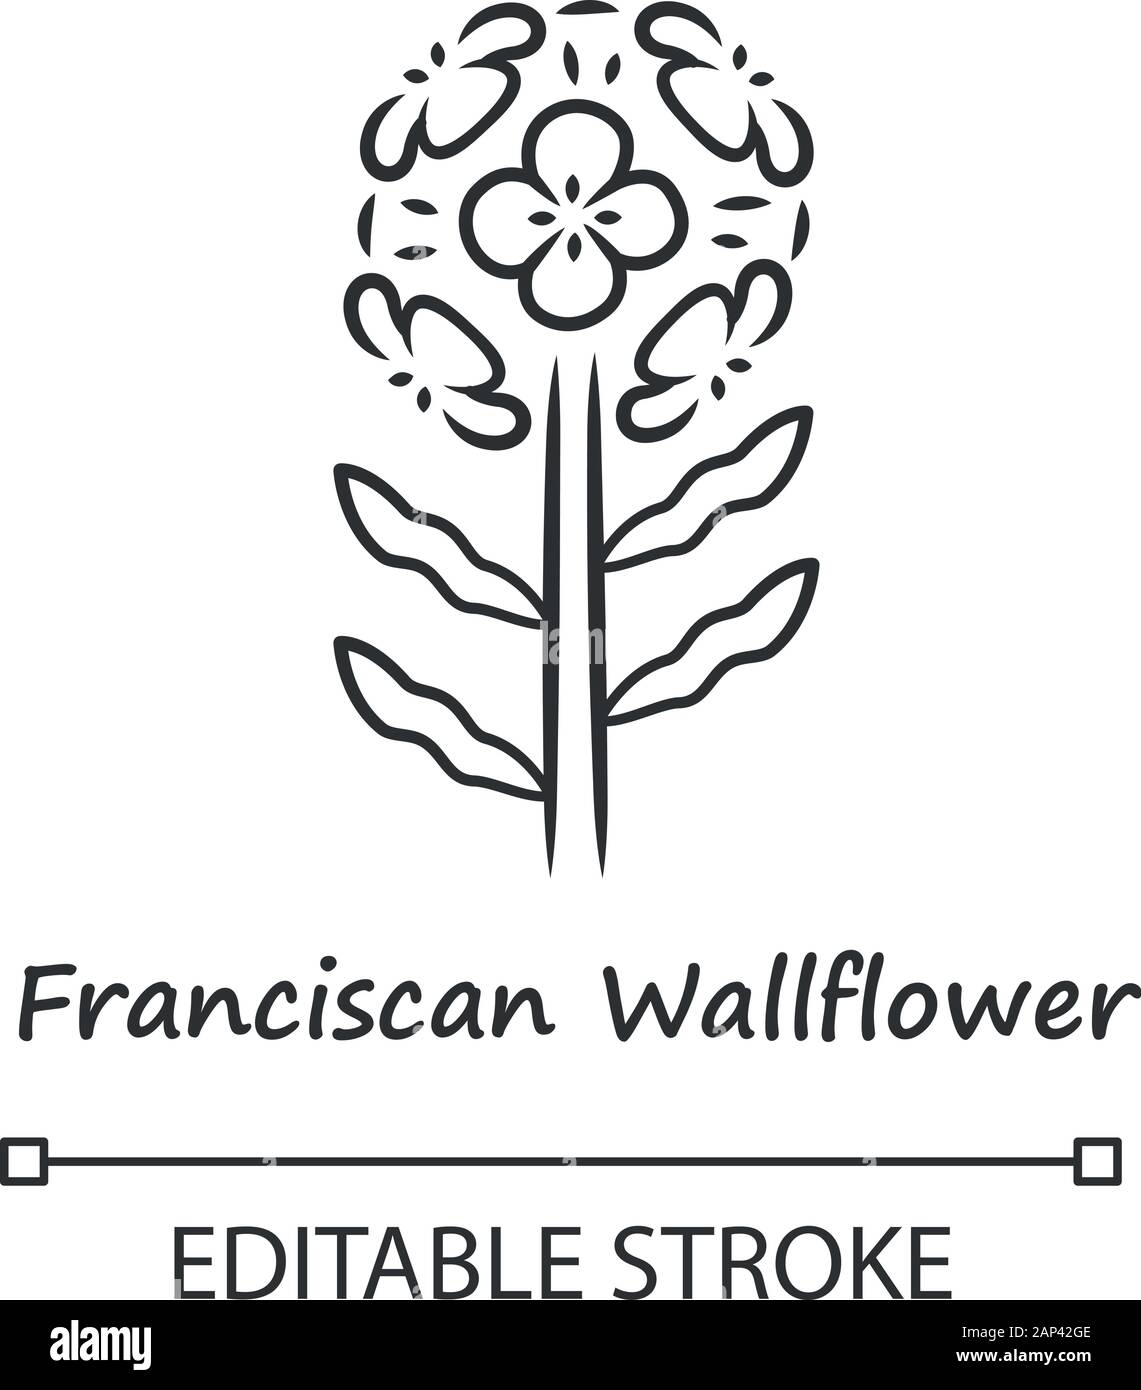 Franciscan wallflower linear icon. Garden flowering plant with name inscription. Erysimum franciscanum inflorescence. Thin line illustration. Contour Stock Vector